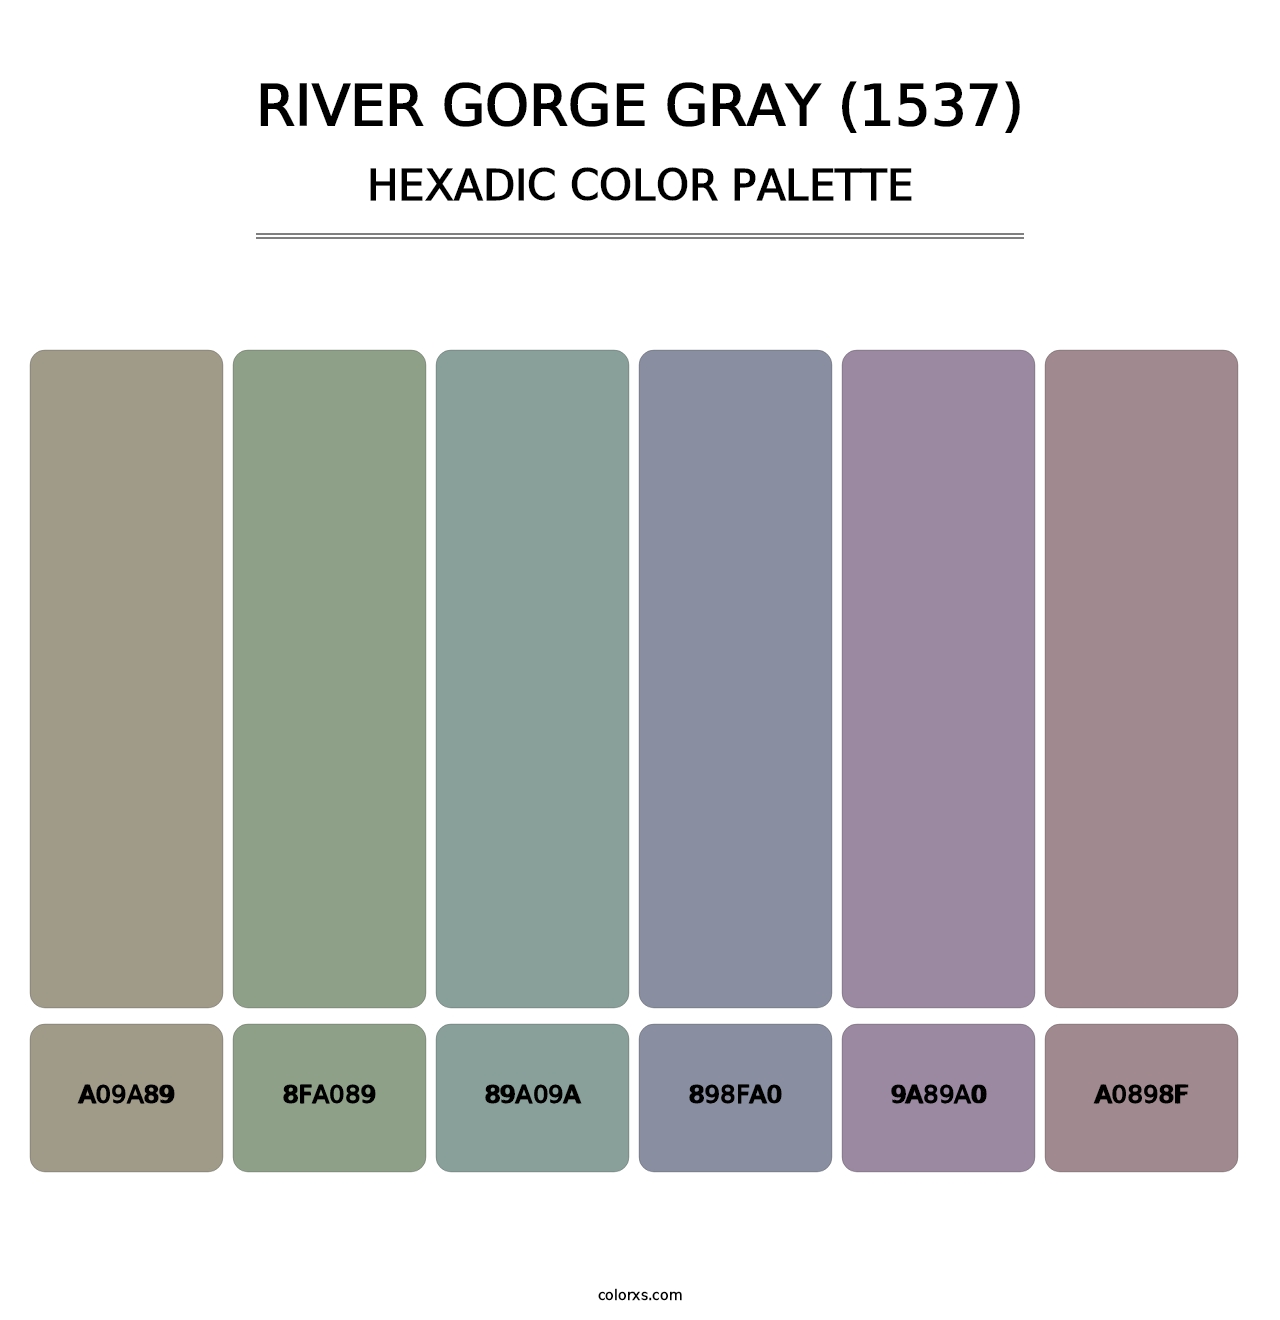 River Gorge Gray (1537) - Hexadic Color Palette